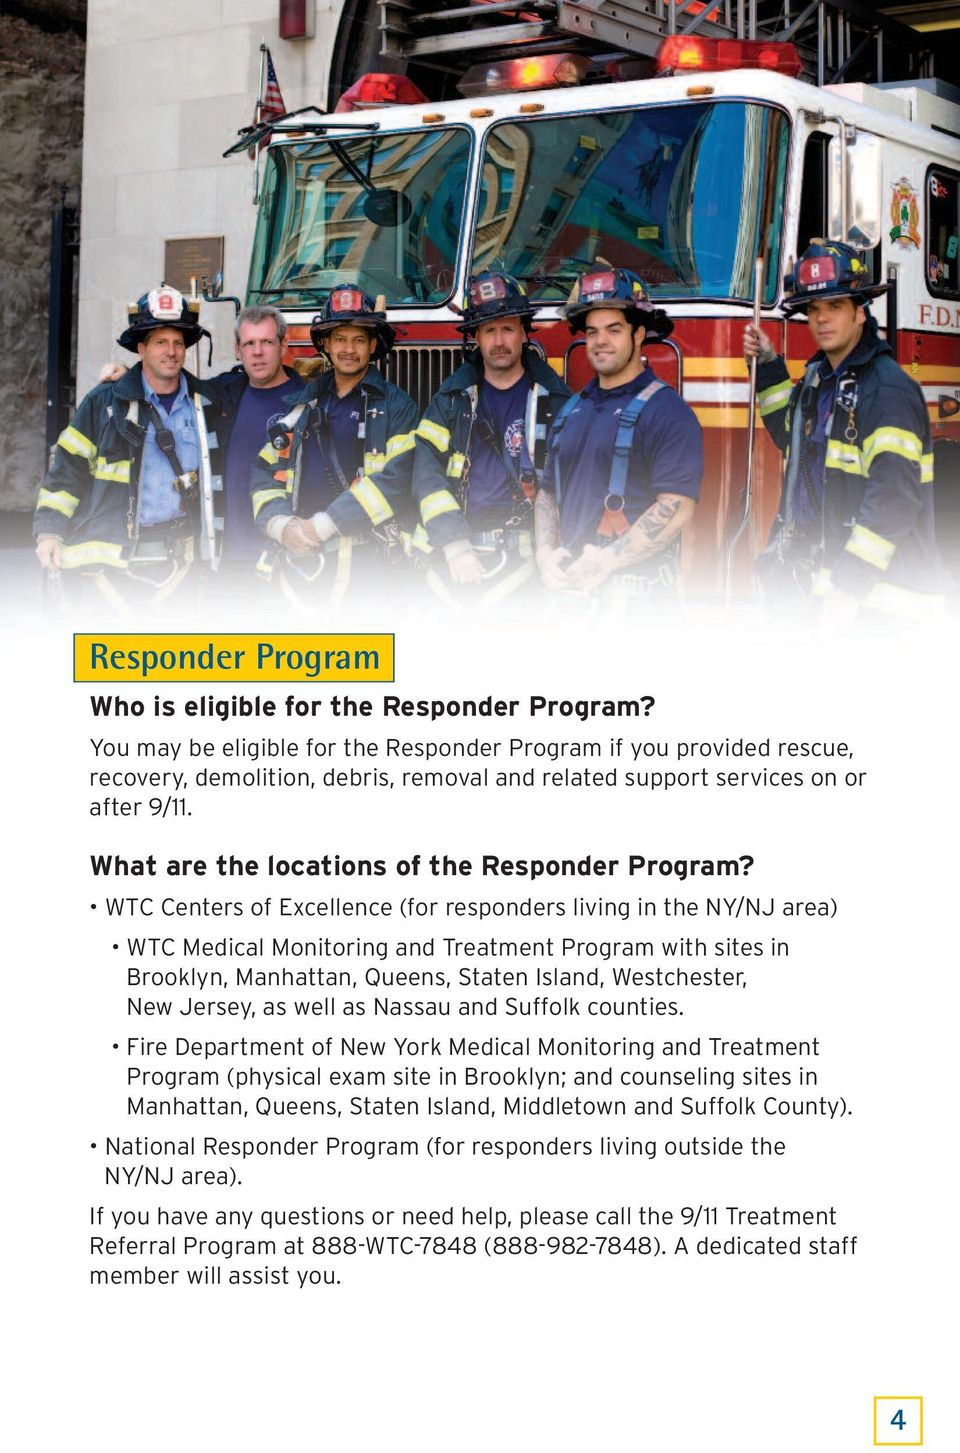 What are the locations of the Responder Program?